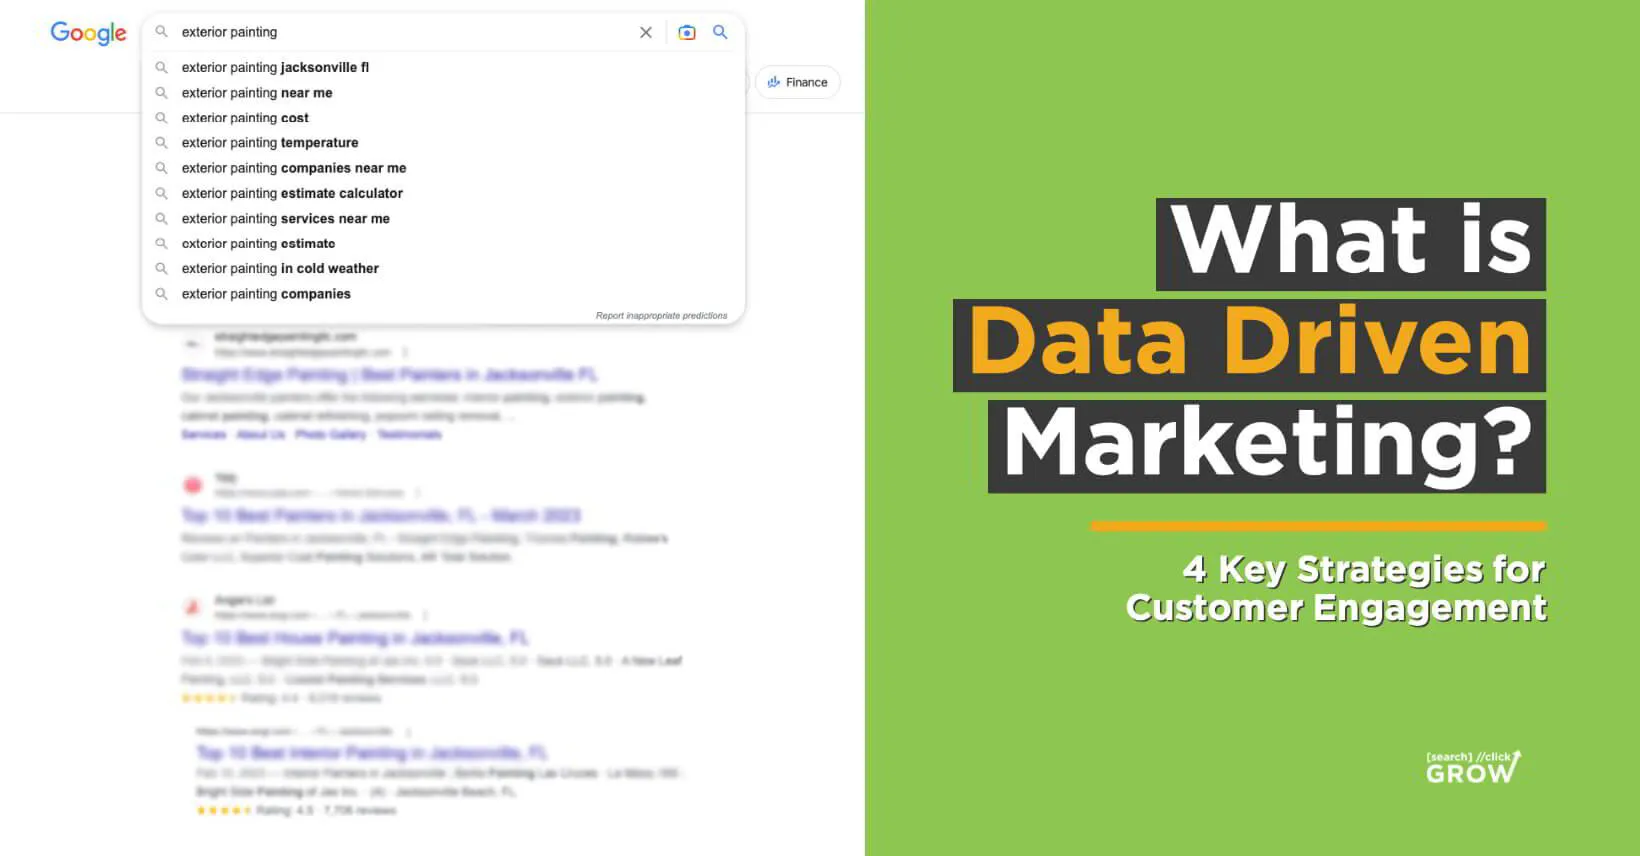 What is Data Driven Marketing? 4 Key Strategies for Customer Engagement